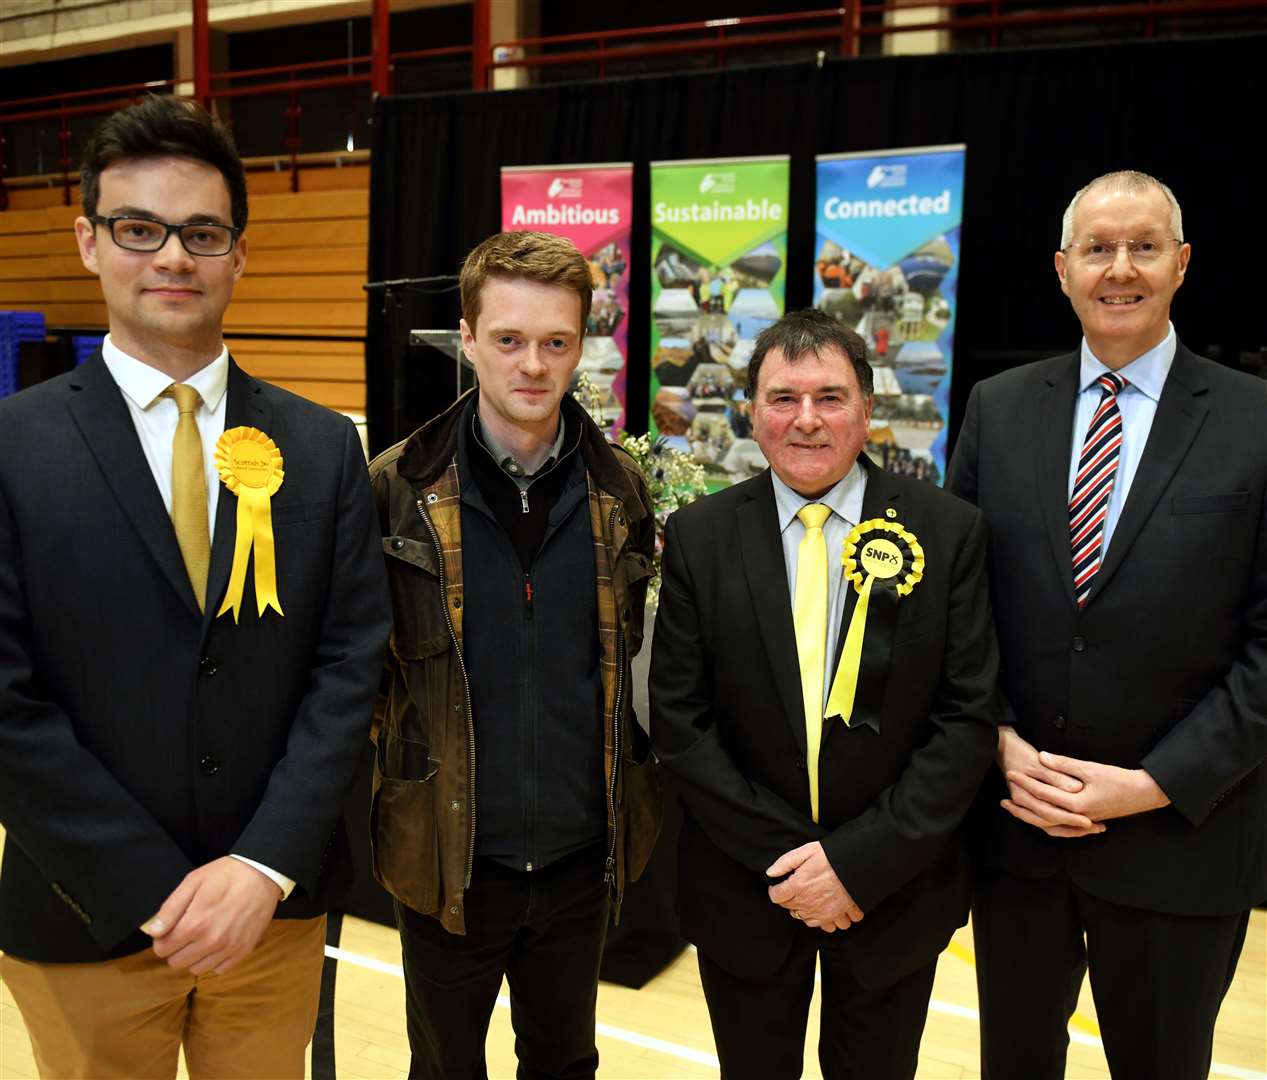 Election Count May 2022: Colin Aitken, Scottish Liberal Democrats, Andrew Sinclair, Scottish Conservative and Unionist, Ken Gowans, Scottish National Party and Duncan Macpherson, Independent. Picture: James Mackenzie.